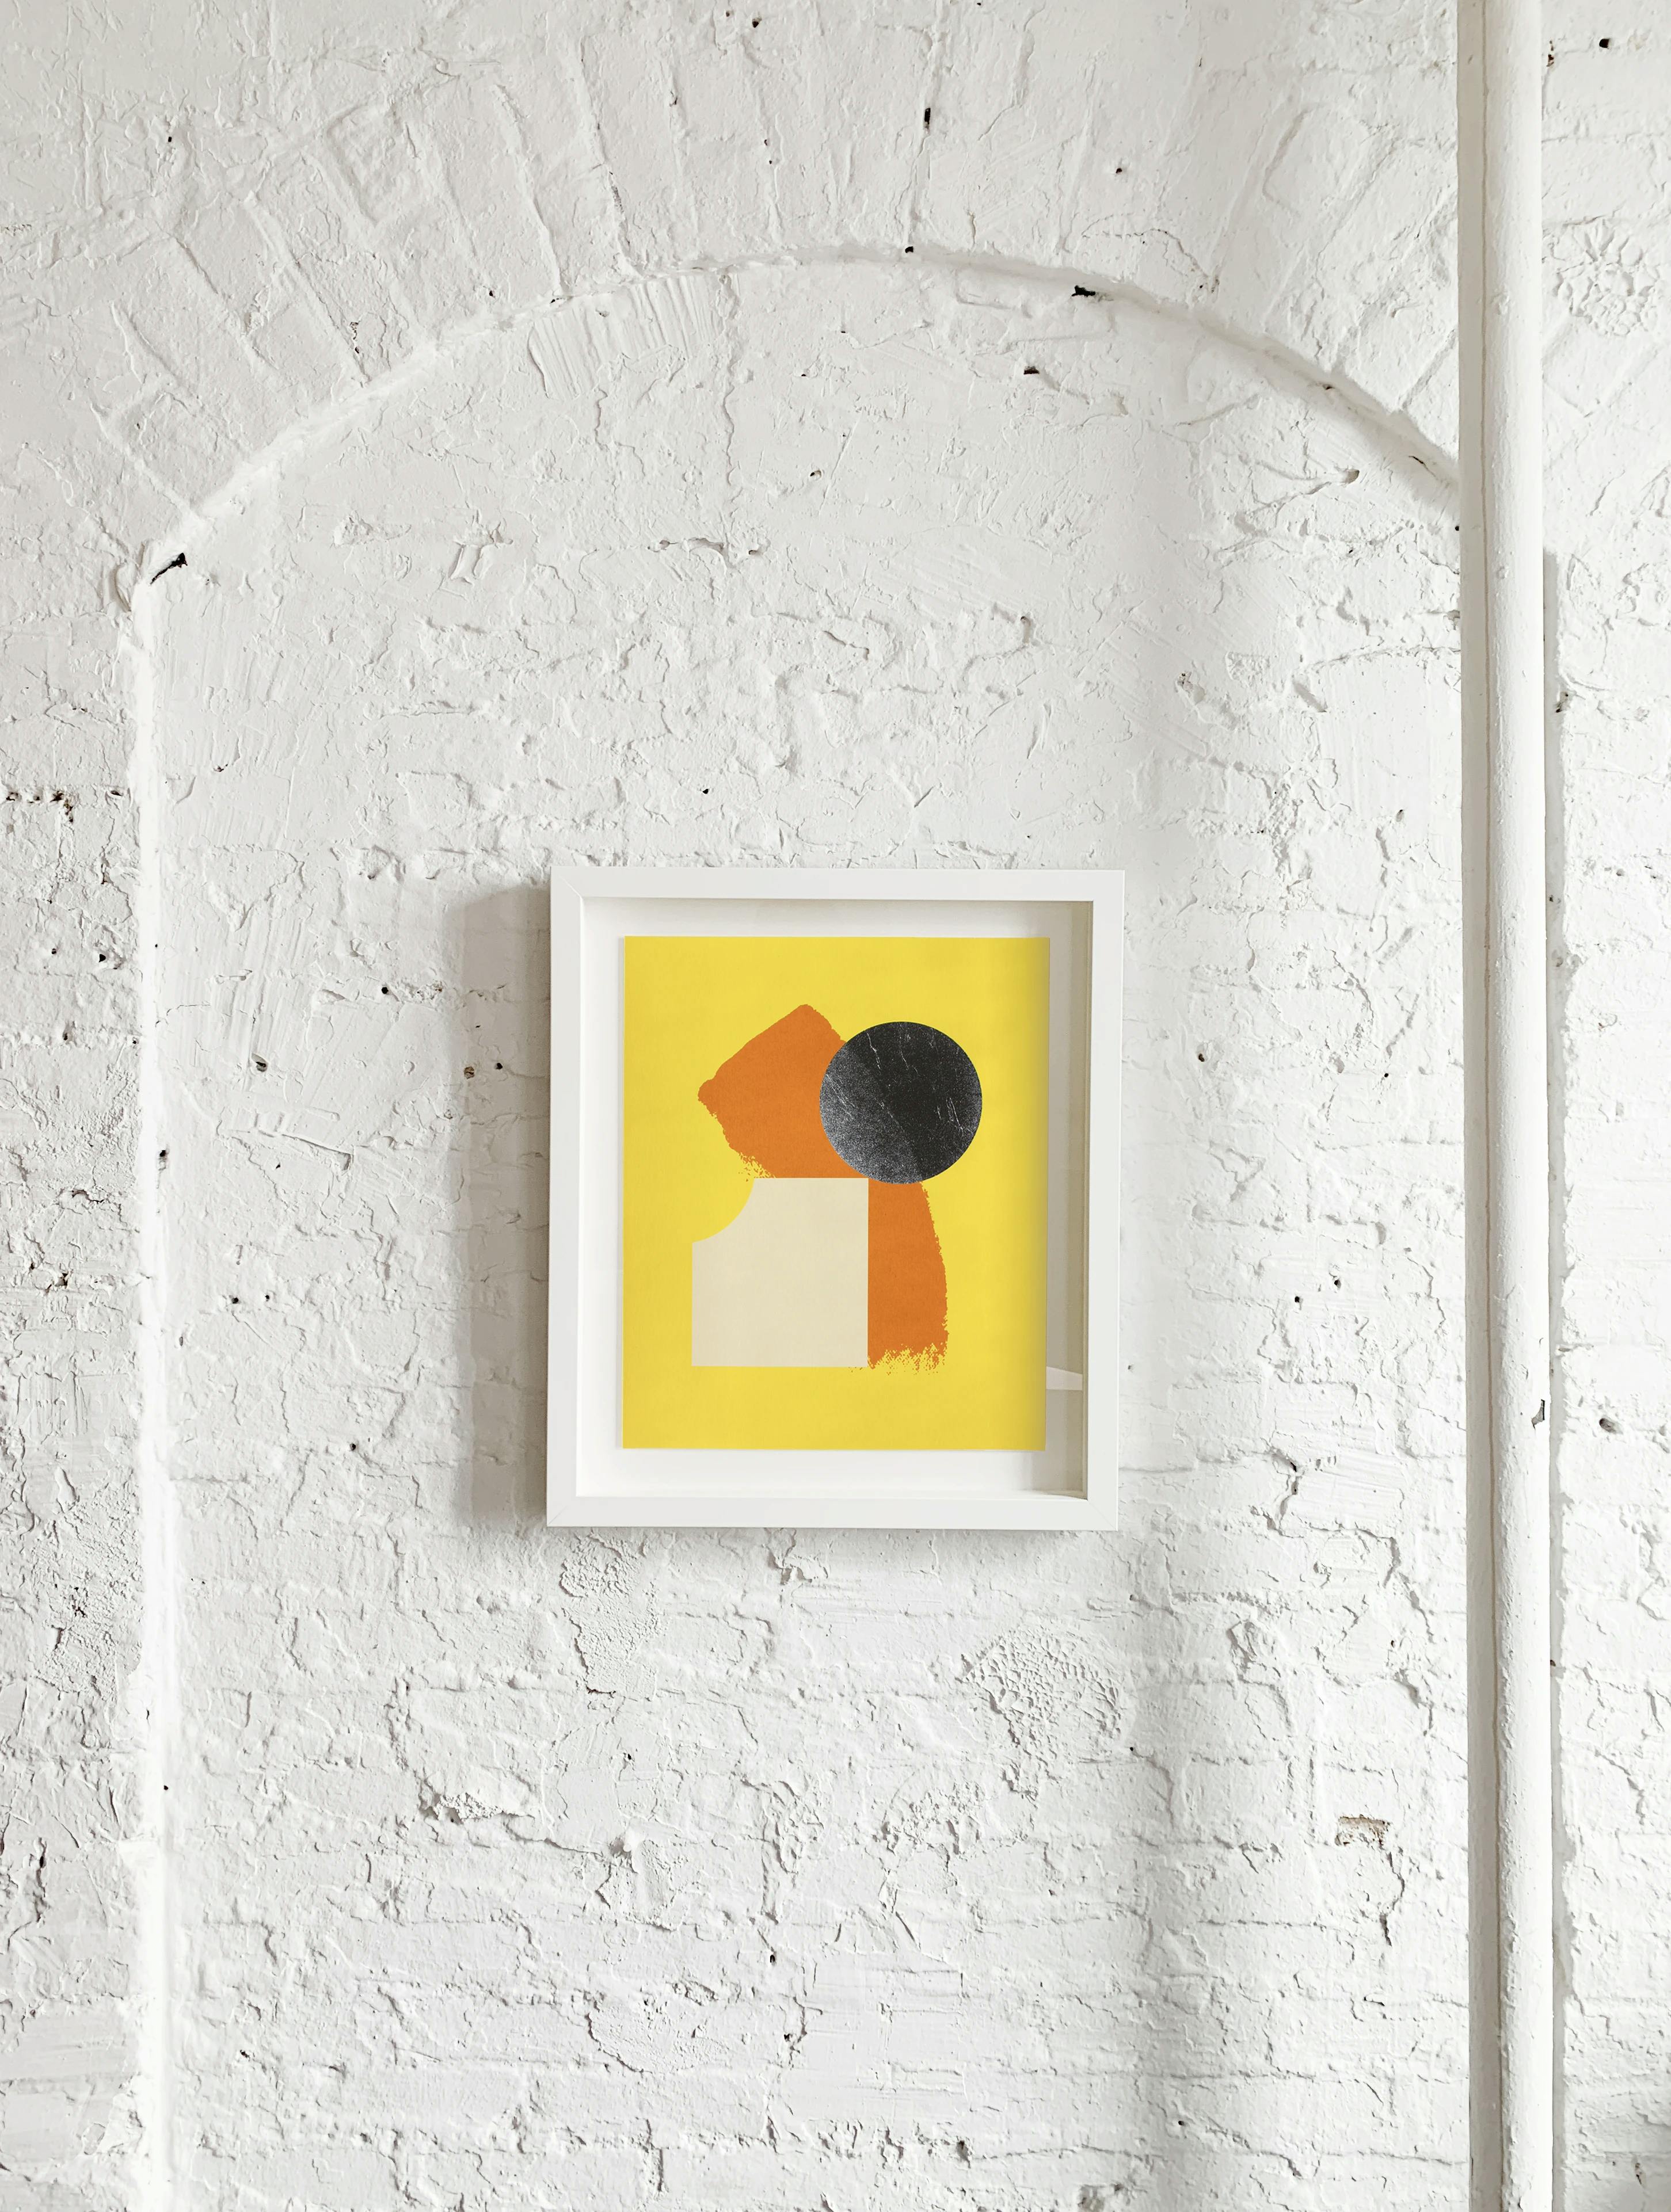 Chad Kouri's print Opportunity for Reflection (Yellow) framed on a white brick wall.